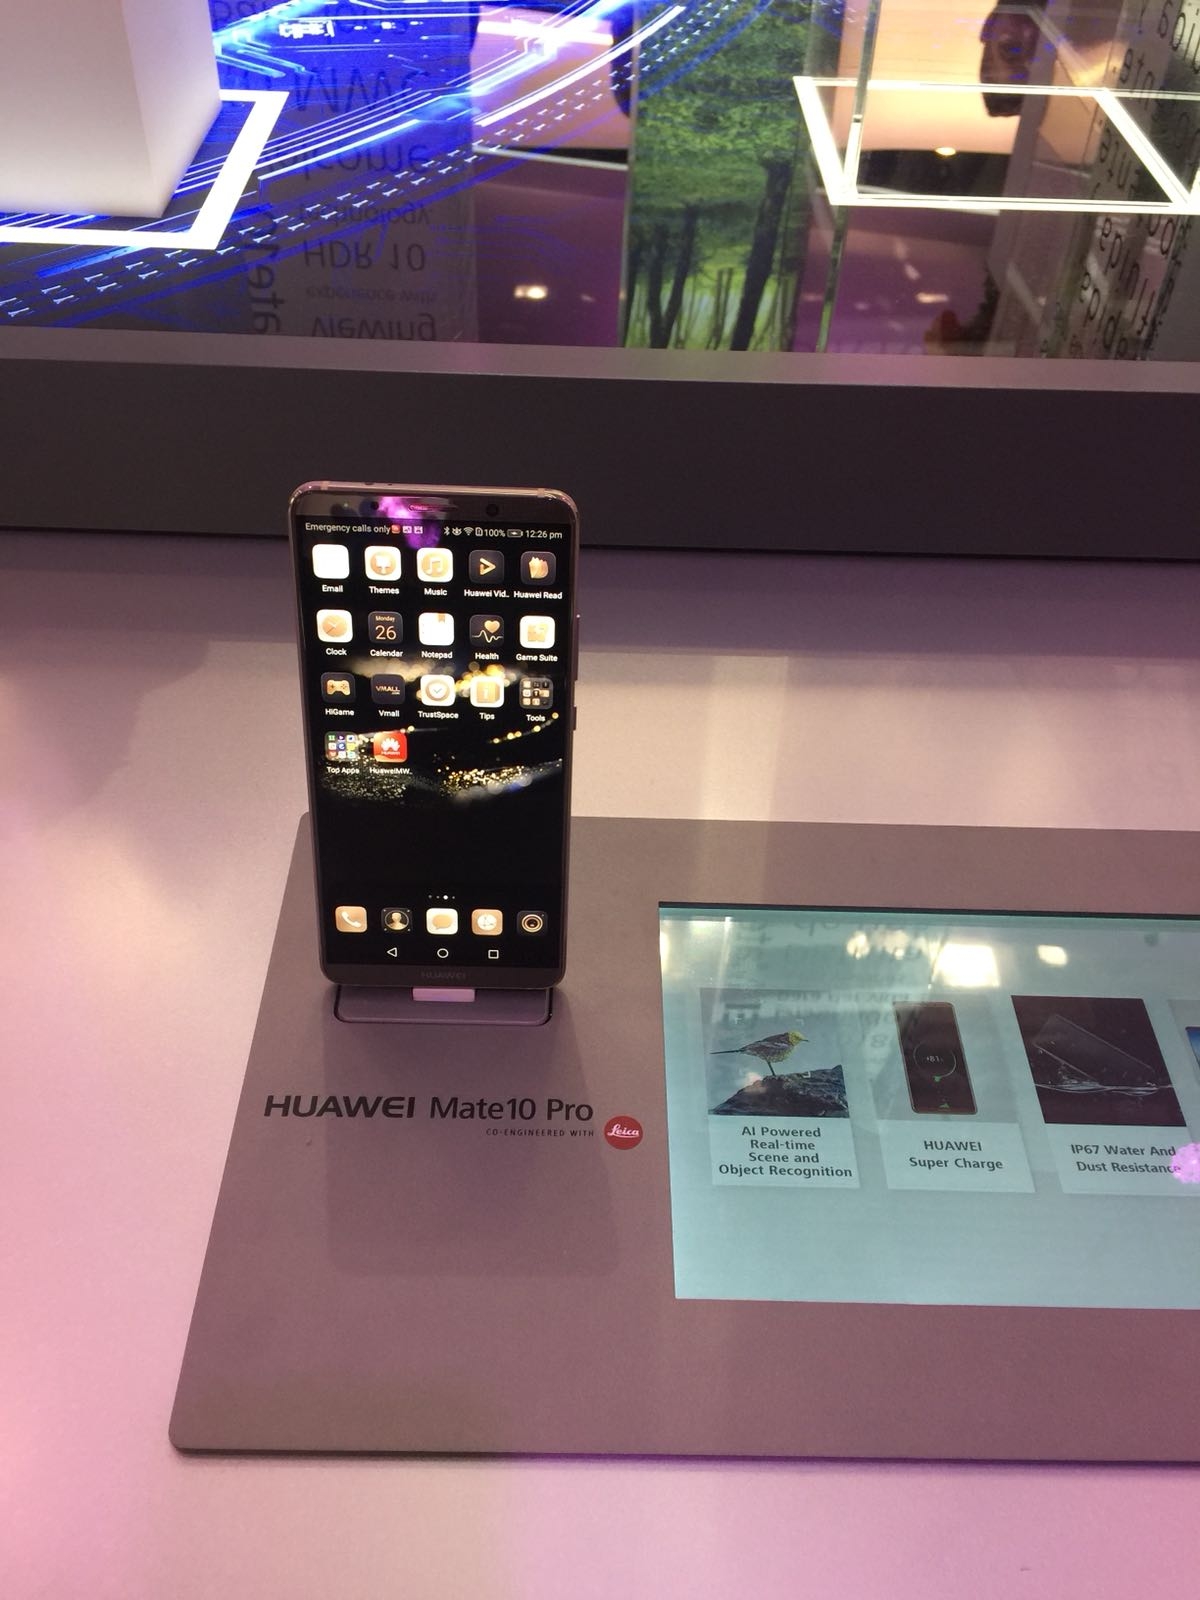 MWC 2018 - Mobile World Congress 2018